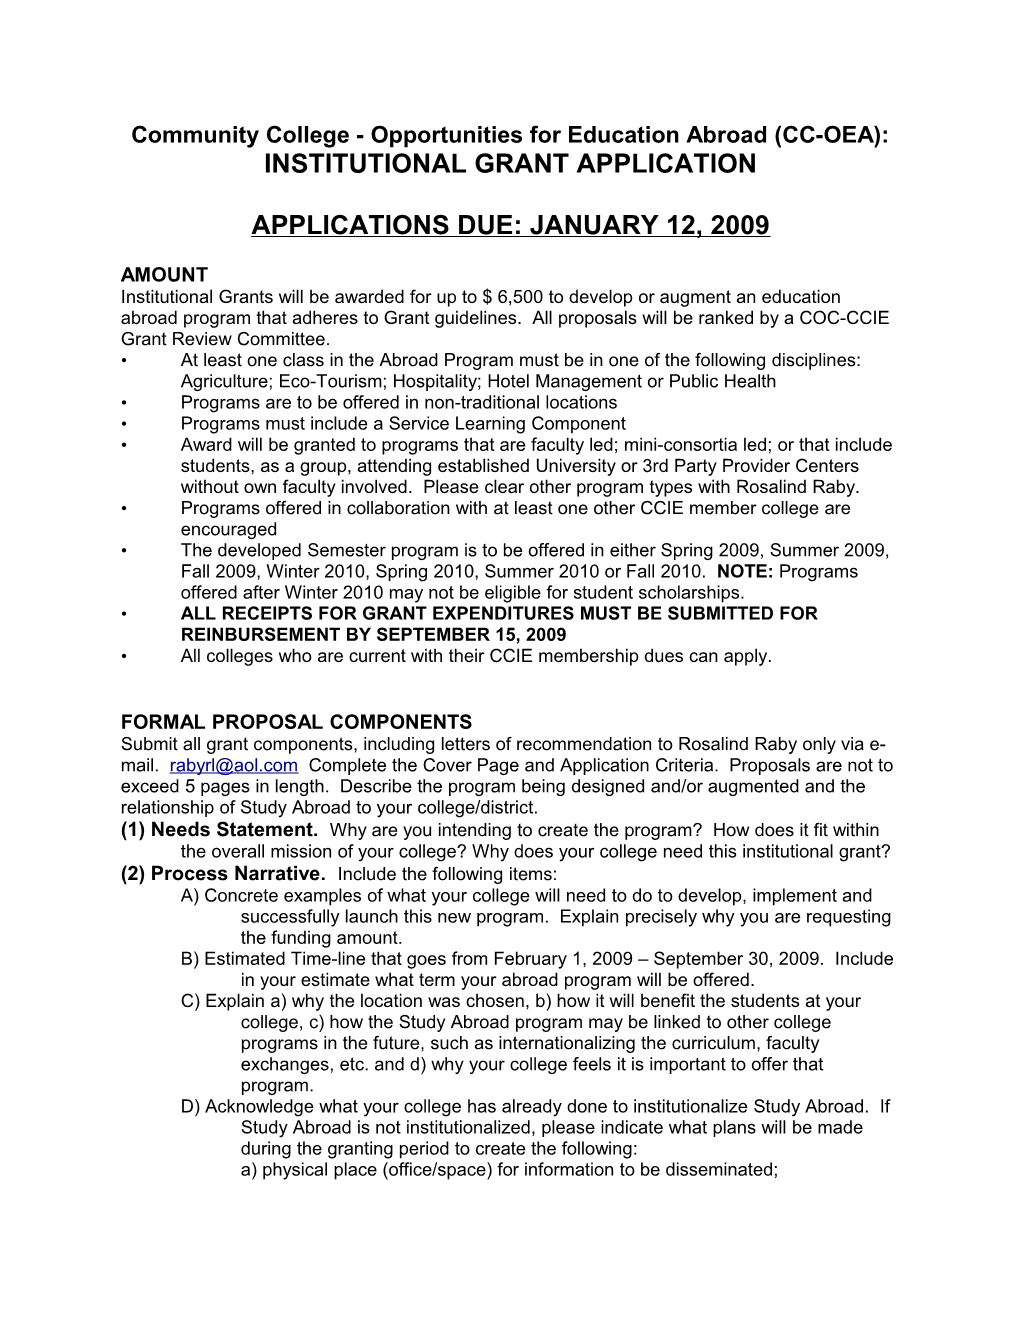 INSTITUTIONAL GRANT APPLICATION: Fall 2007